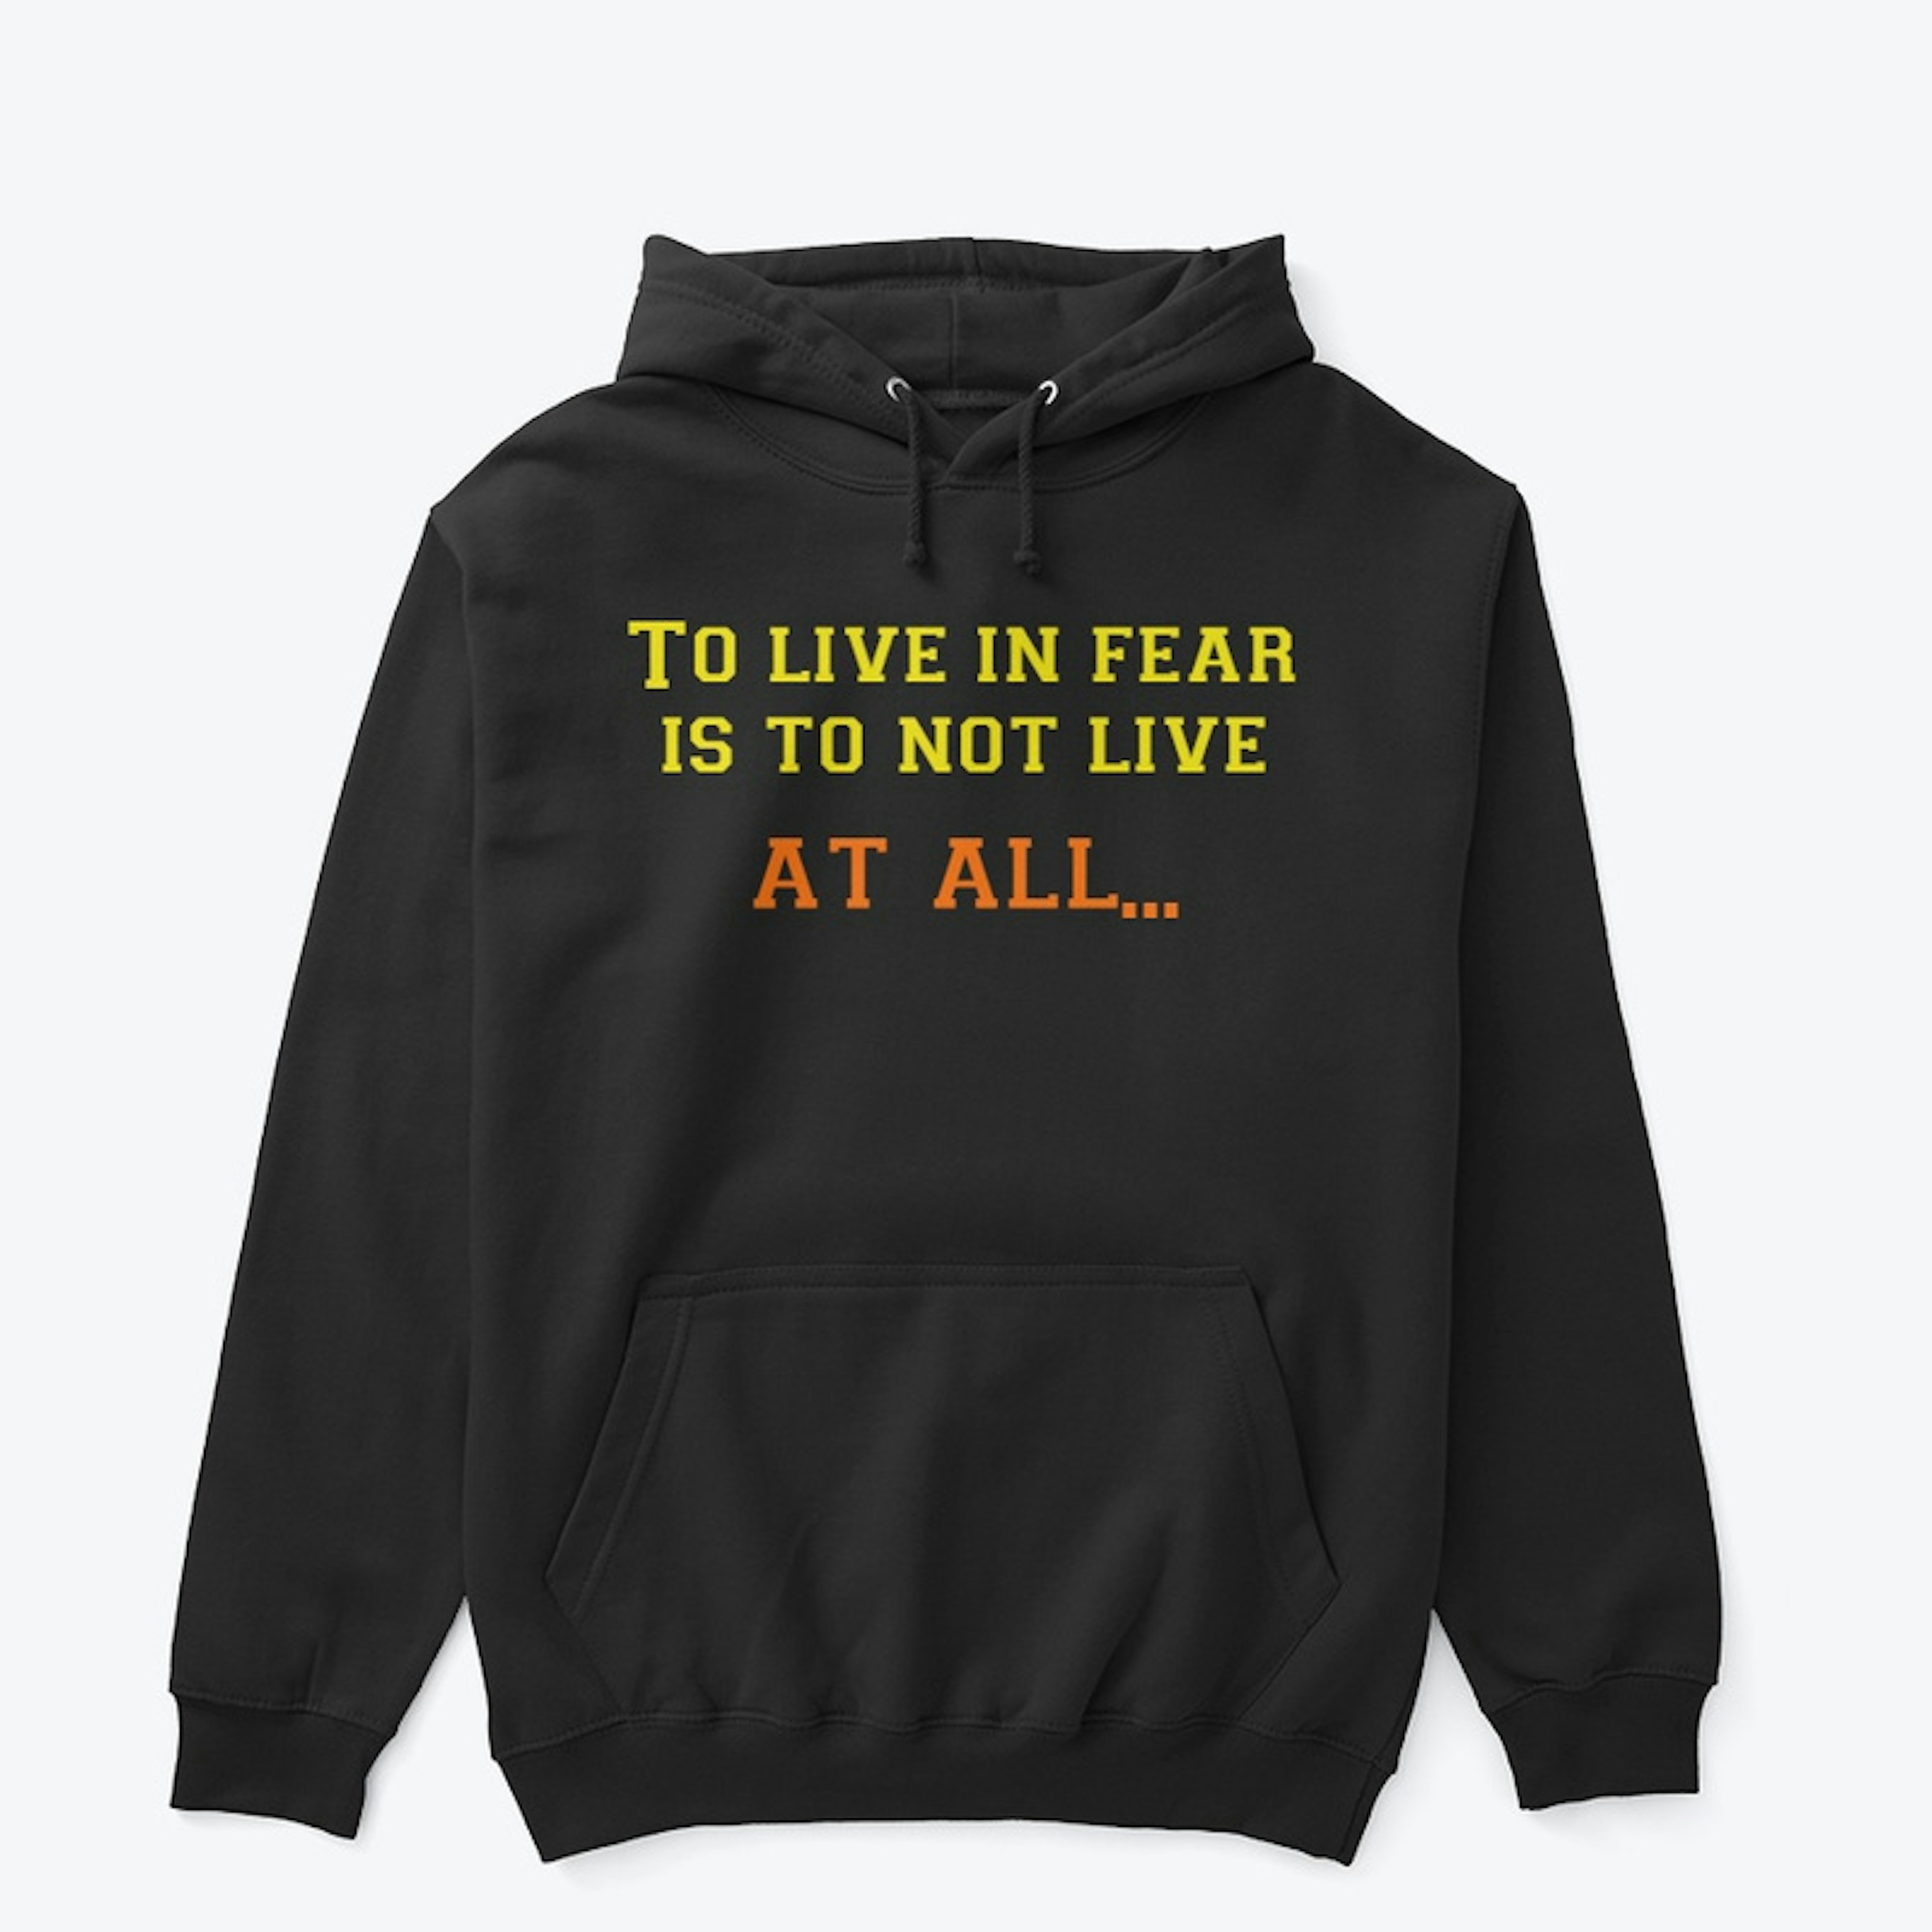 Don't live in fear